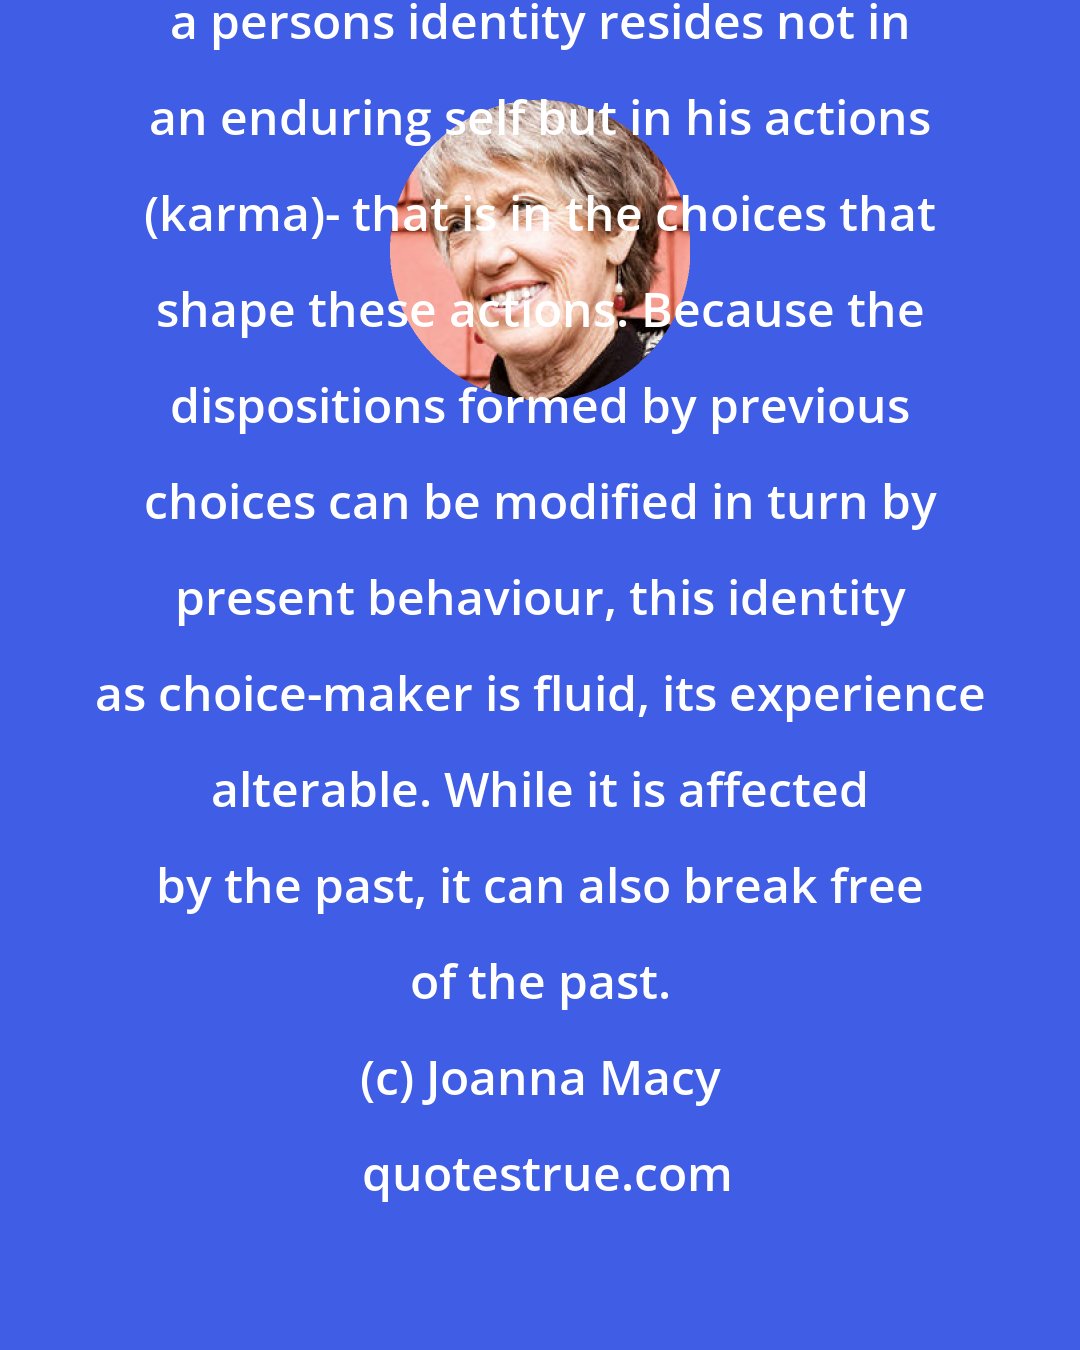 Joanna Macy: In the early Buddhist view, then, a persons identity resides not in an enduring self but in his actions (karma)- that is in the choices that shape these actions. Because the dispositions formed by previous choices can be modified in turn by present behaviour, this identity as choice-maker is fluid, its experience alterable. While it is affected by the past, it can also break free of the past.